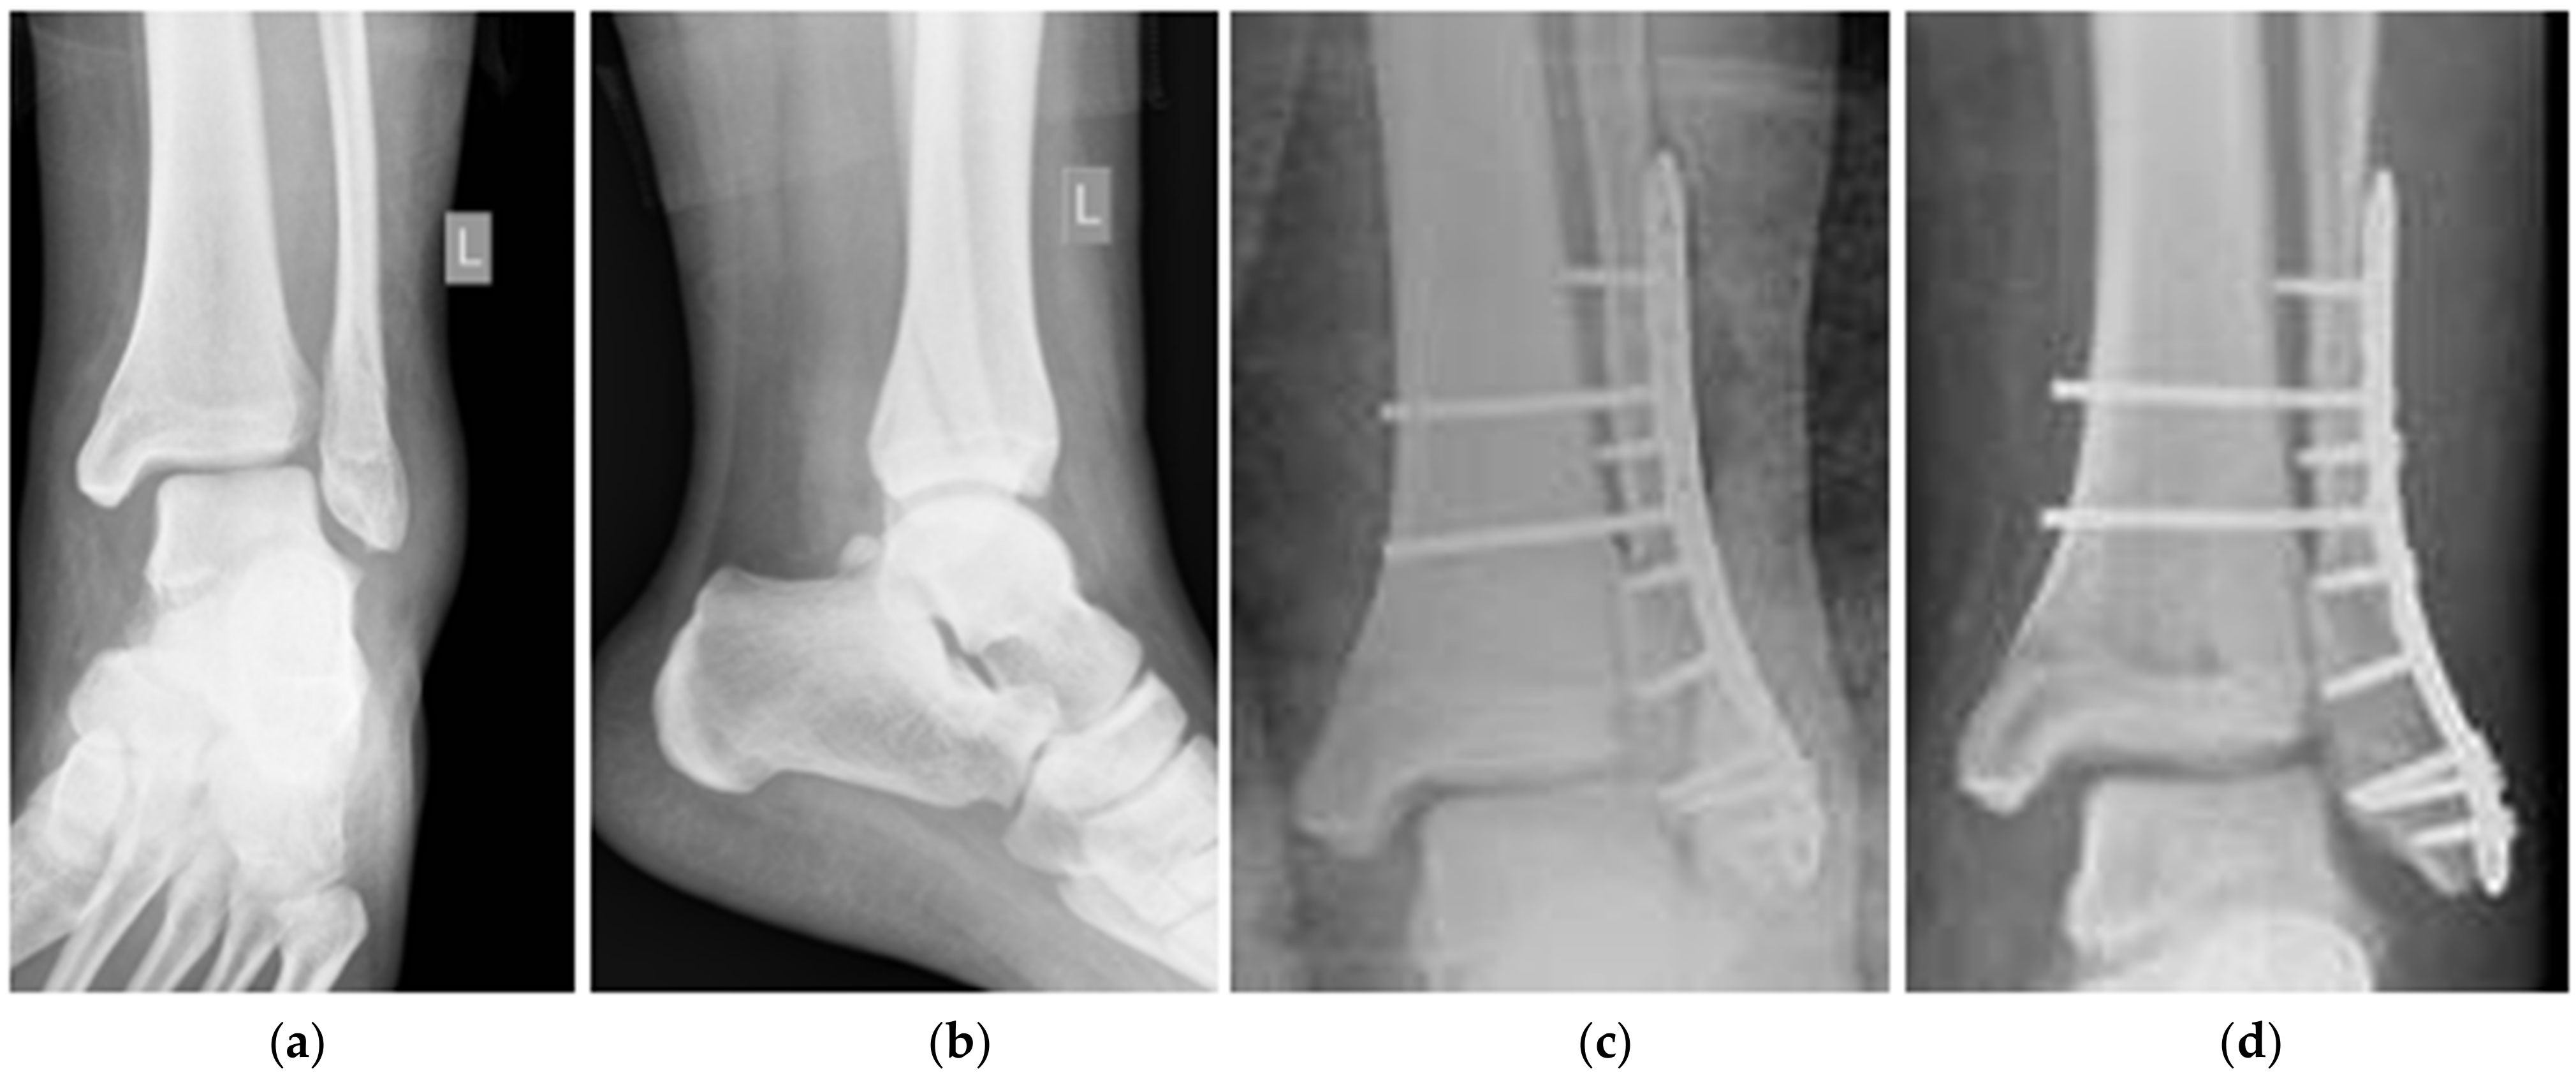 Diagnostics | Free Full-Text | Deformation of the Titanium Plate  Stabilizing the Lateral Ankle Fracture Due to Its Overloading in Case of  the Young, Obese Patient: Case Report Including the Biomechanical Analysis